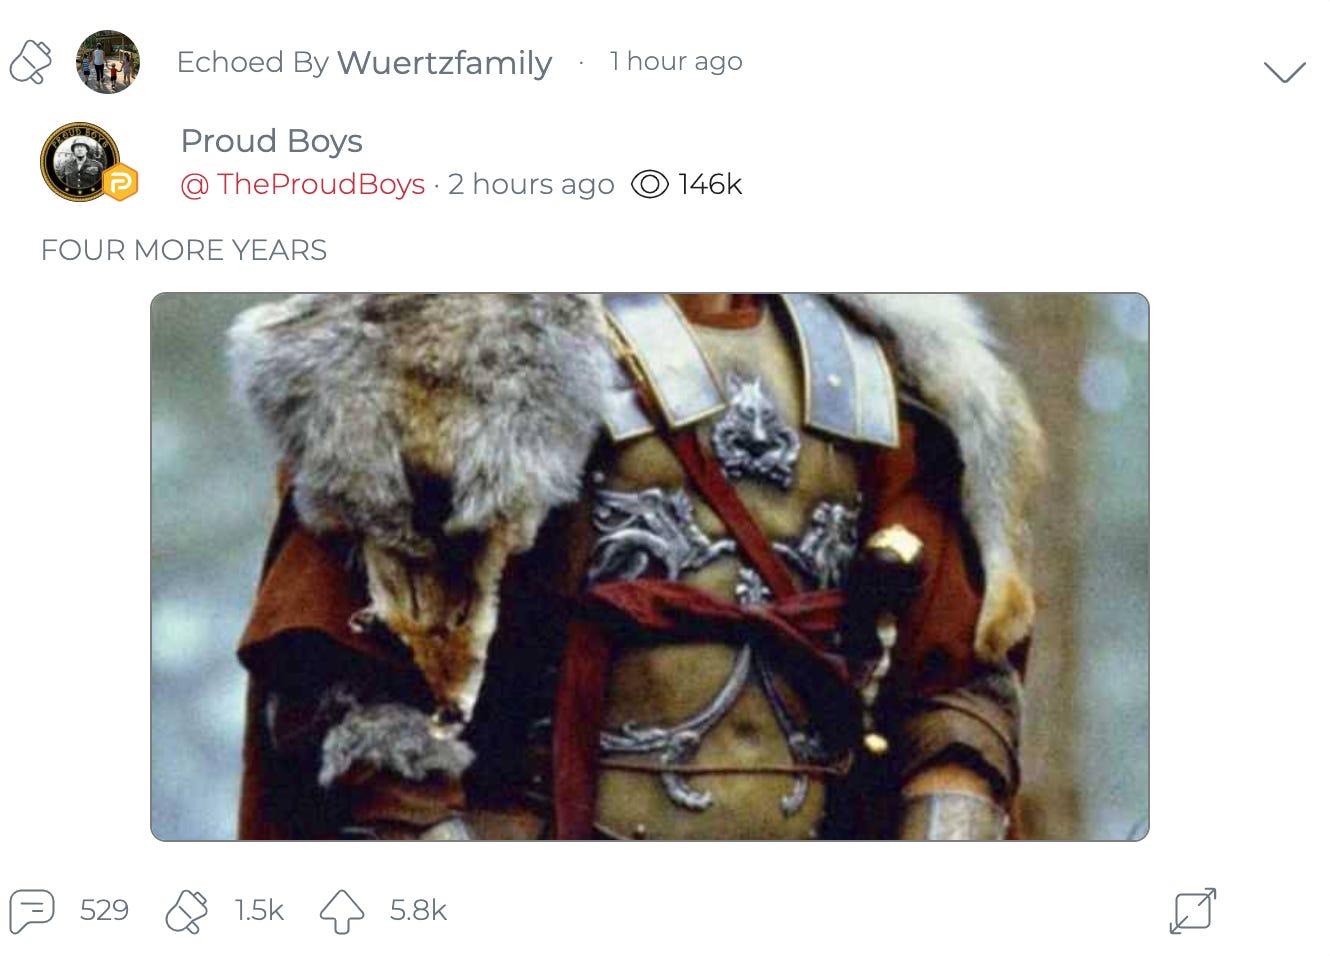 @WuertzFamily shares a Donald Trump meme posted by the official Proud Boys account on Parler. You can see the full meme on Imgur. (Image: Parler screenshot.)